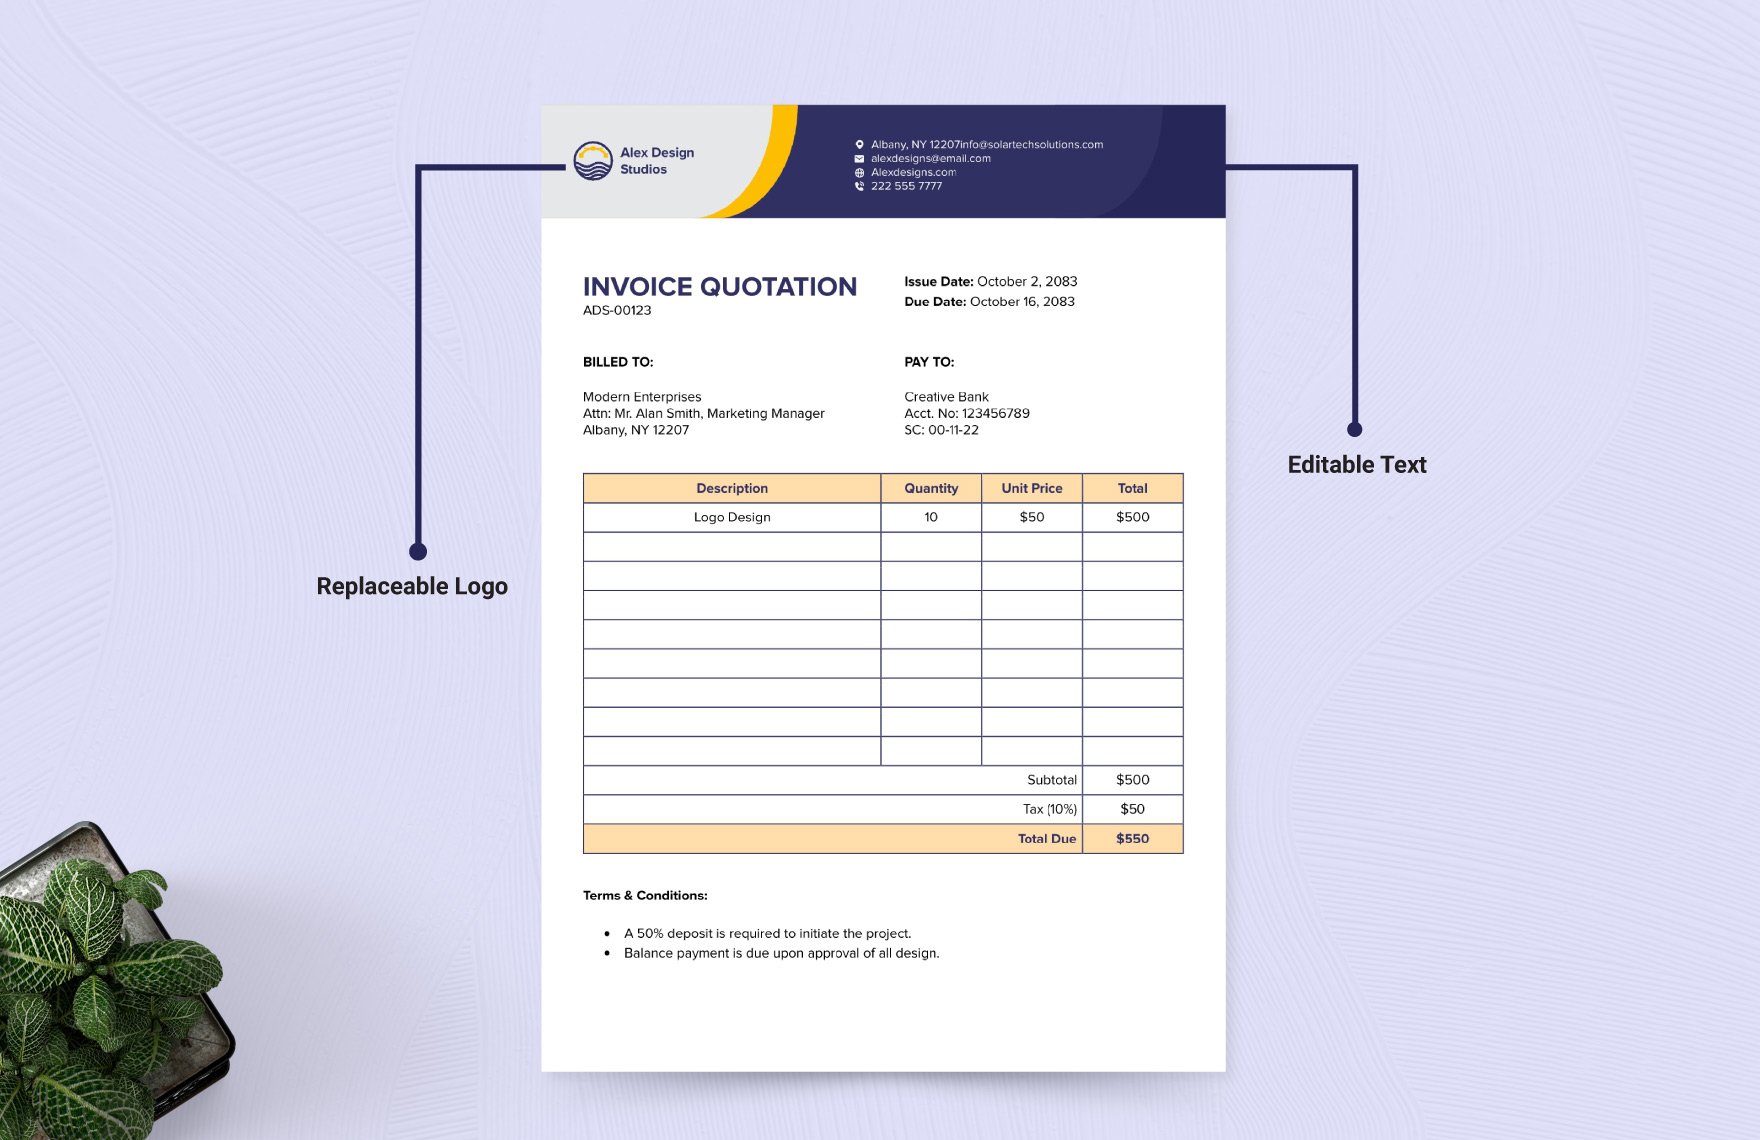 Invoice Quotation Template